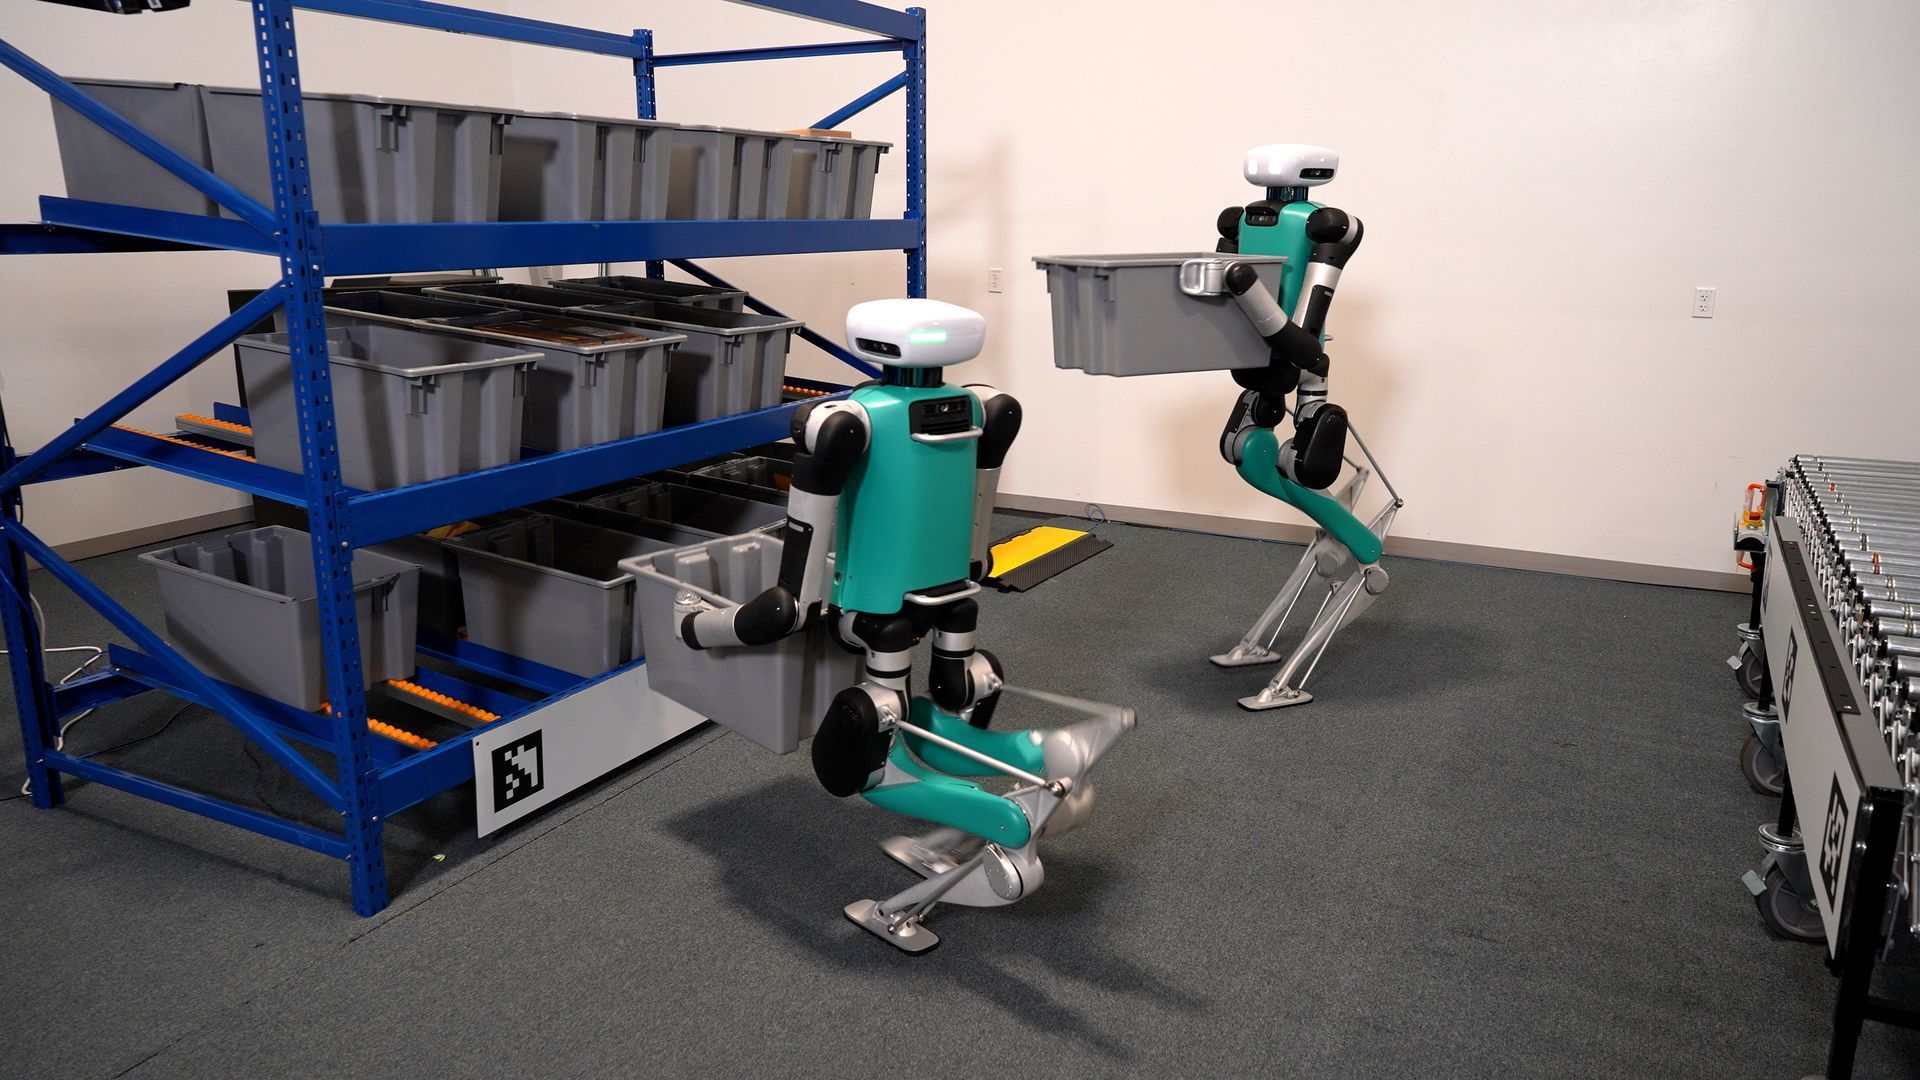 Robots with vaguely human forms from Agility Robotics — named Digit — are designed for logistics work.